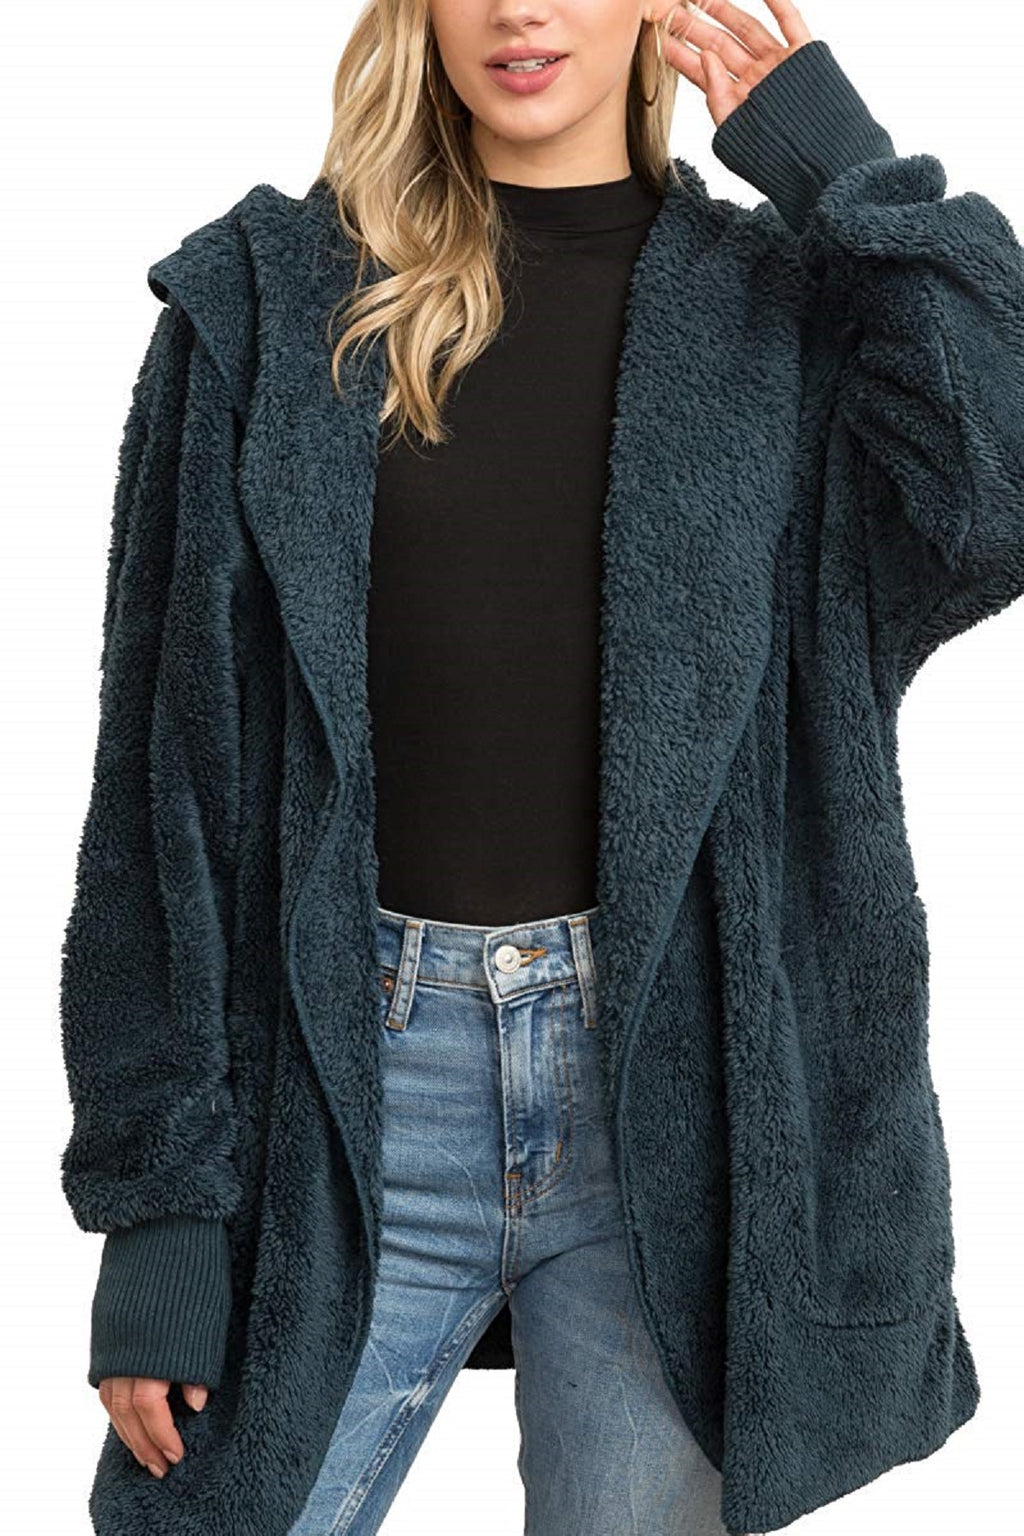 Le Moda Both Side Fur Open Jacket with Pockets - Teal at Linda Anderson